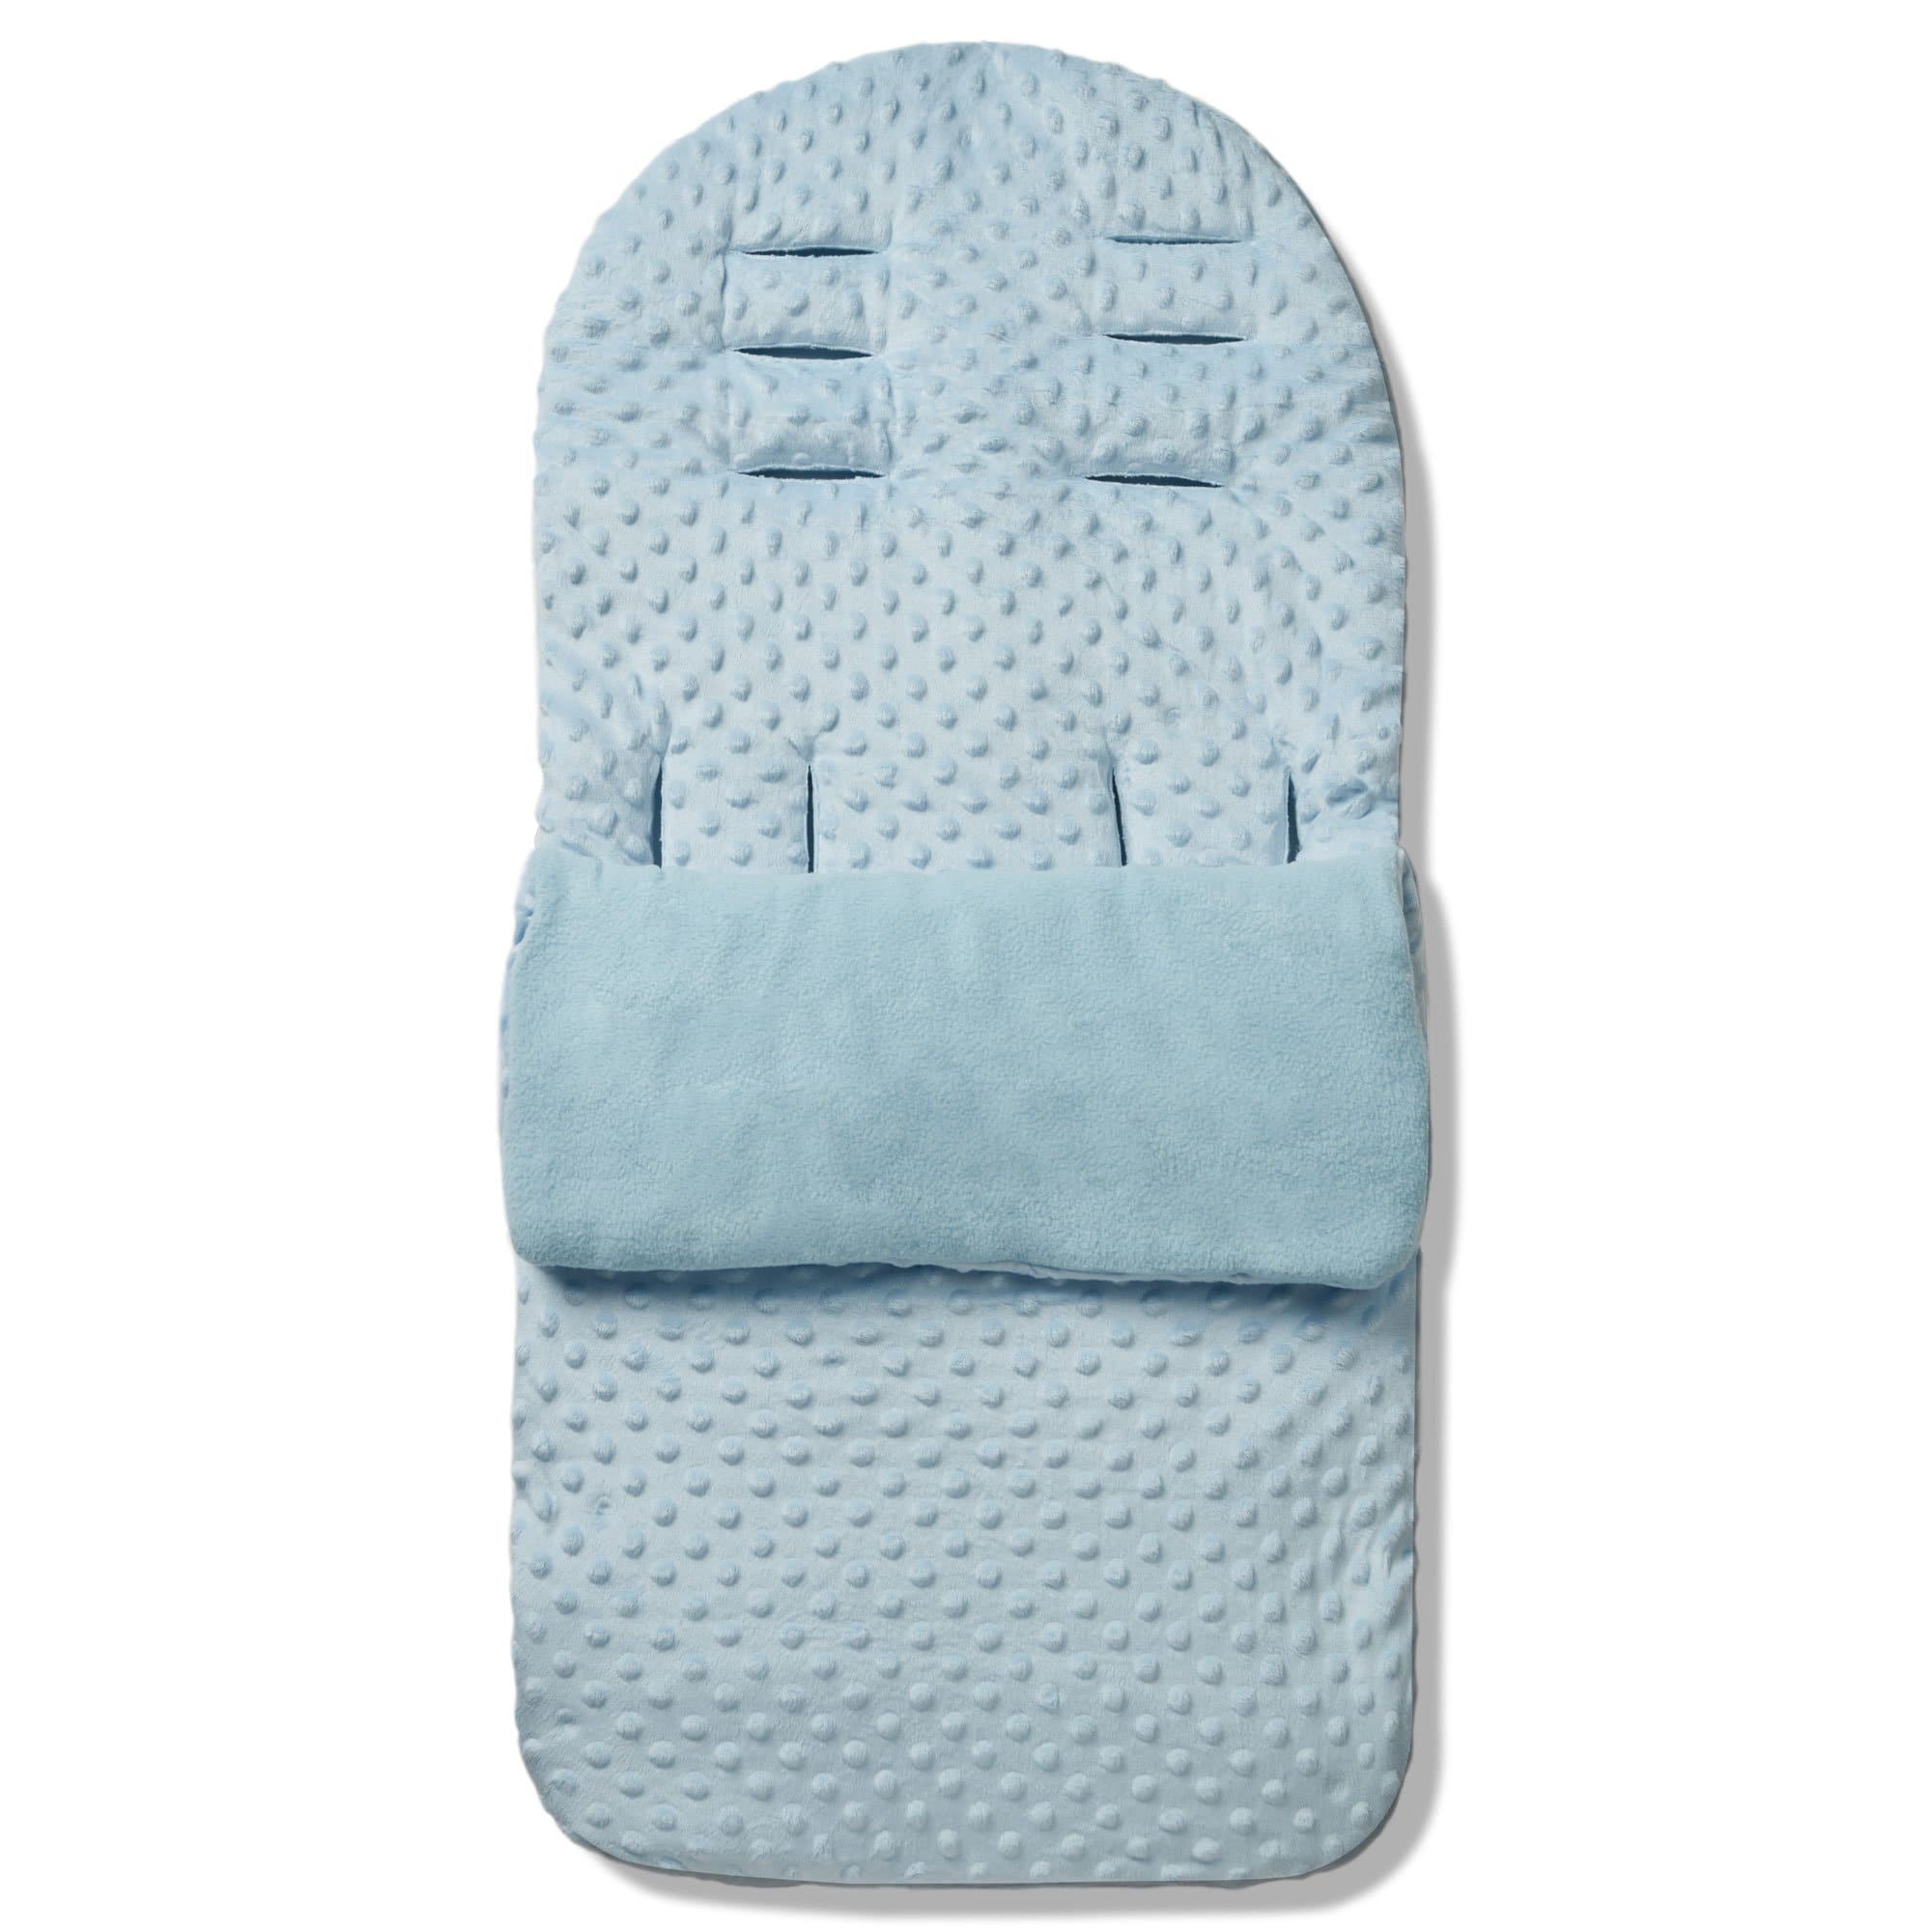 Dimple Footmuff / Cosy Toes Compatible with Recaro - Blue / Fits All Models | For Your Little One